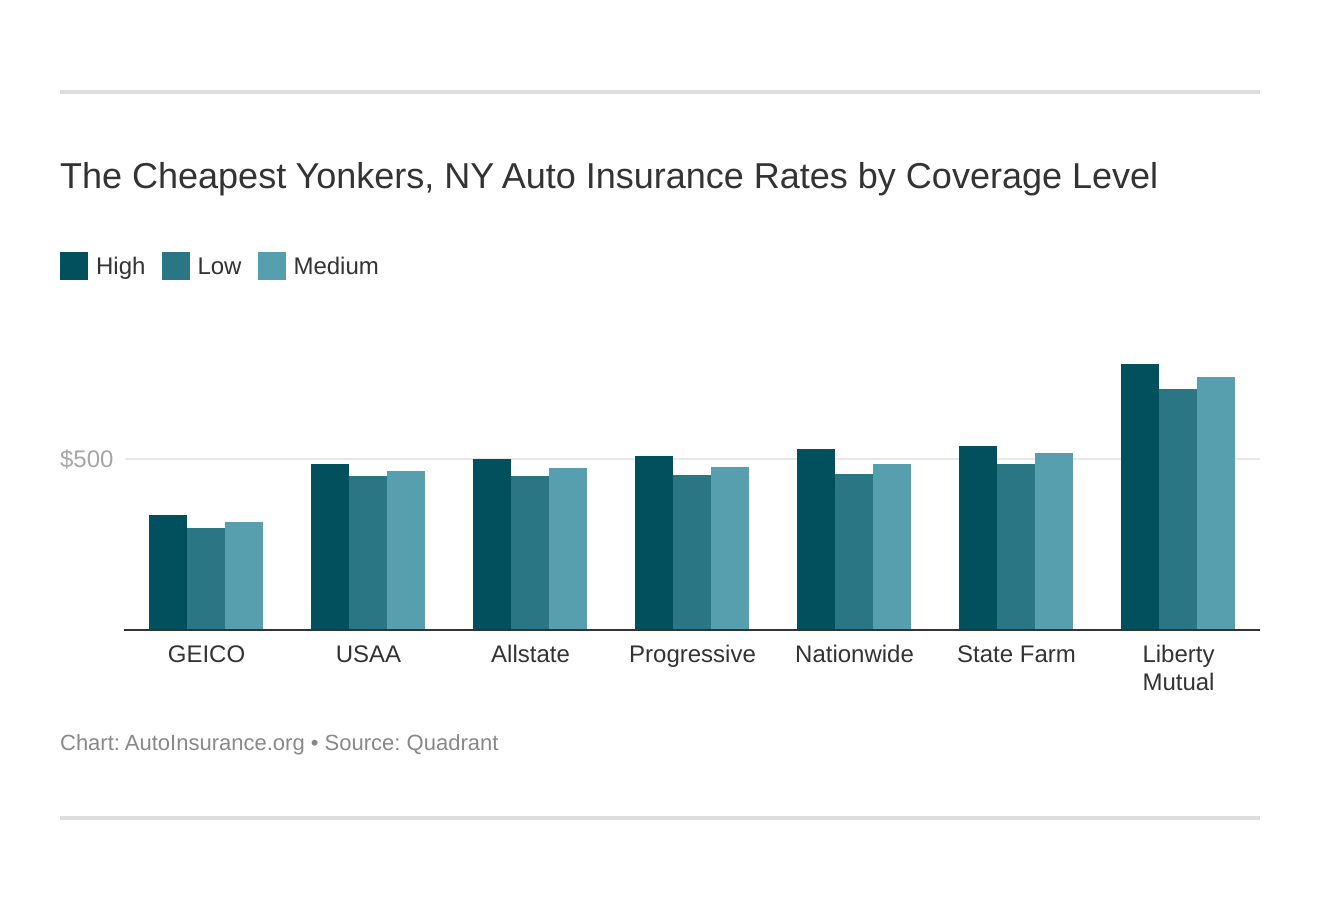 The Cheapest Yonkers, NY Auto Insurance Rates by Coverage Level